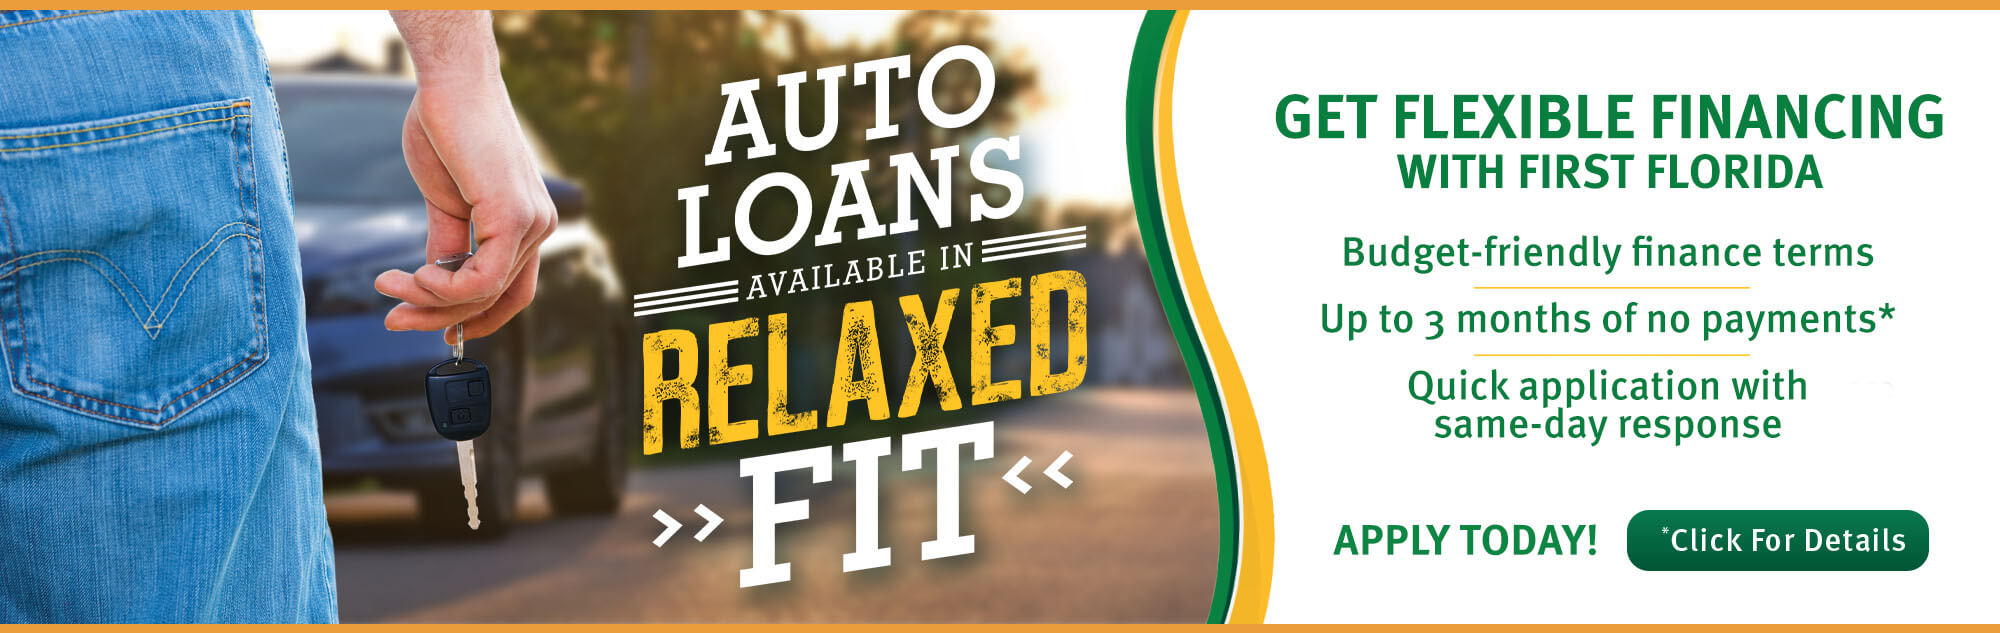 Auto Loans Available in Relaxed Fit - Get Flexible Financing with First Florida - Budget-friendly finance terms - Up to 3 Months of no payments* - Quick Application with same-day response - Apply Today! - *Click for Details